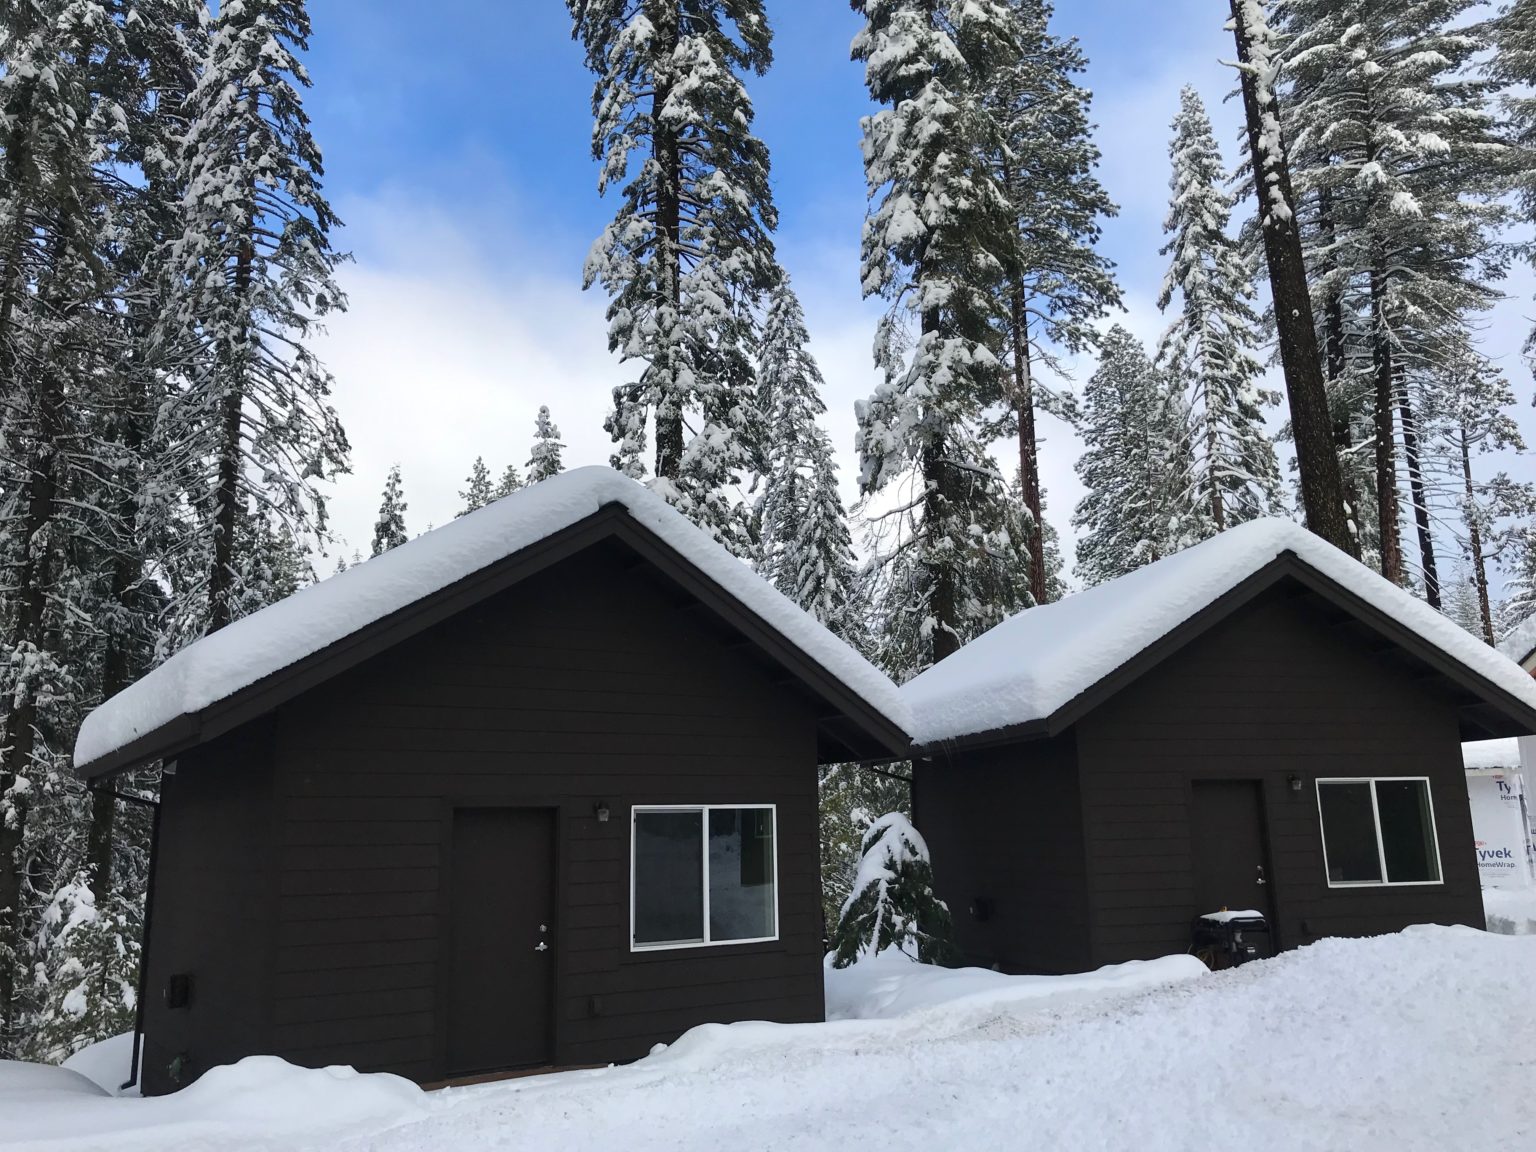 2 new winterized cabins at Camp Oski, which are dark brown, covered in snow, and nestled in a backdrop of snowy pine trees and blue skies.